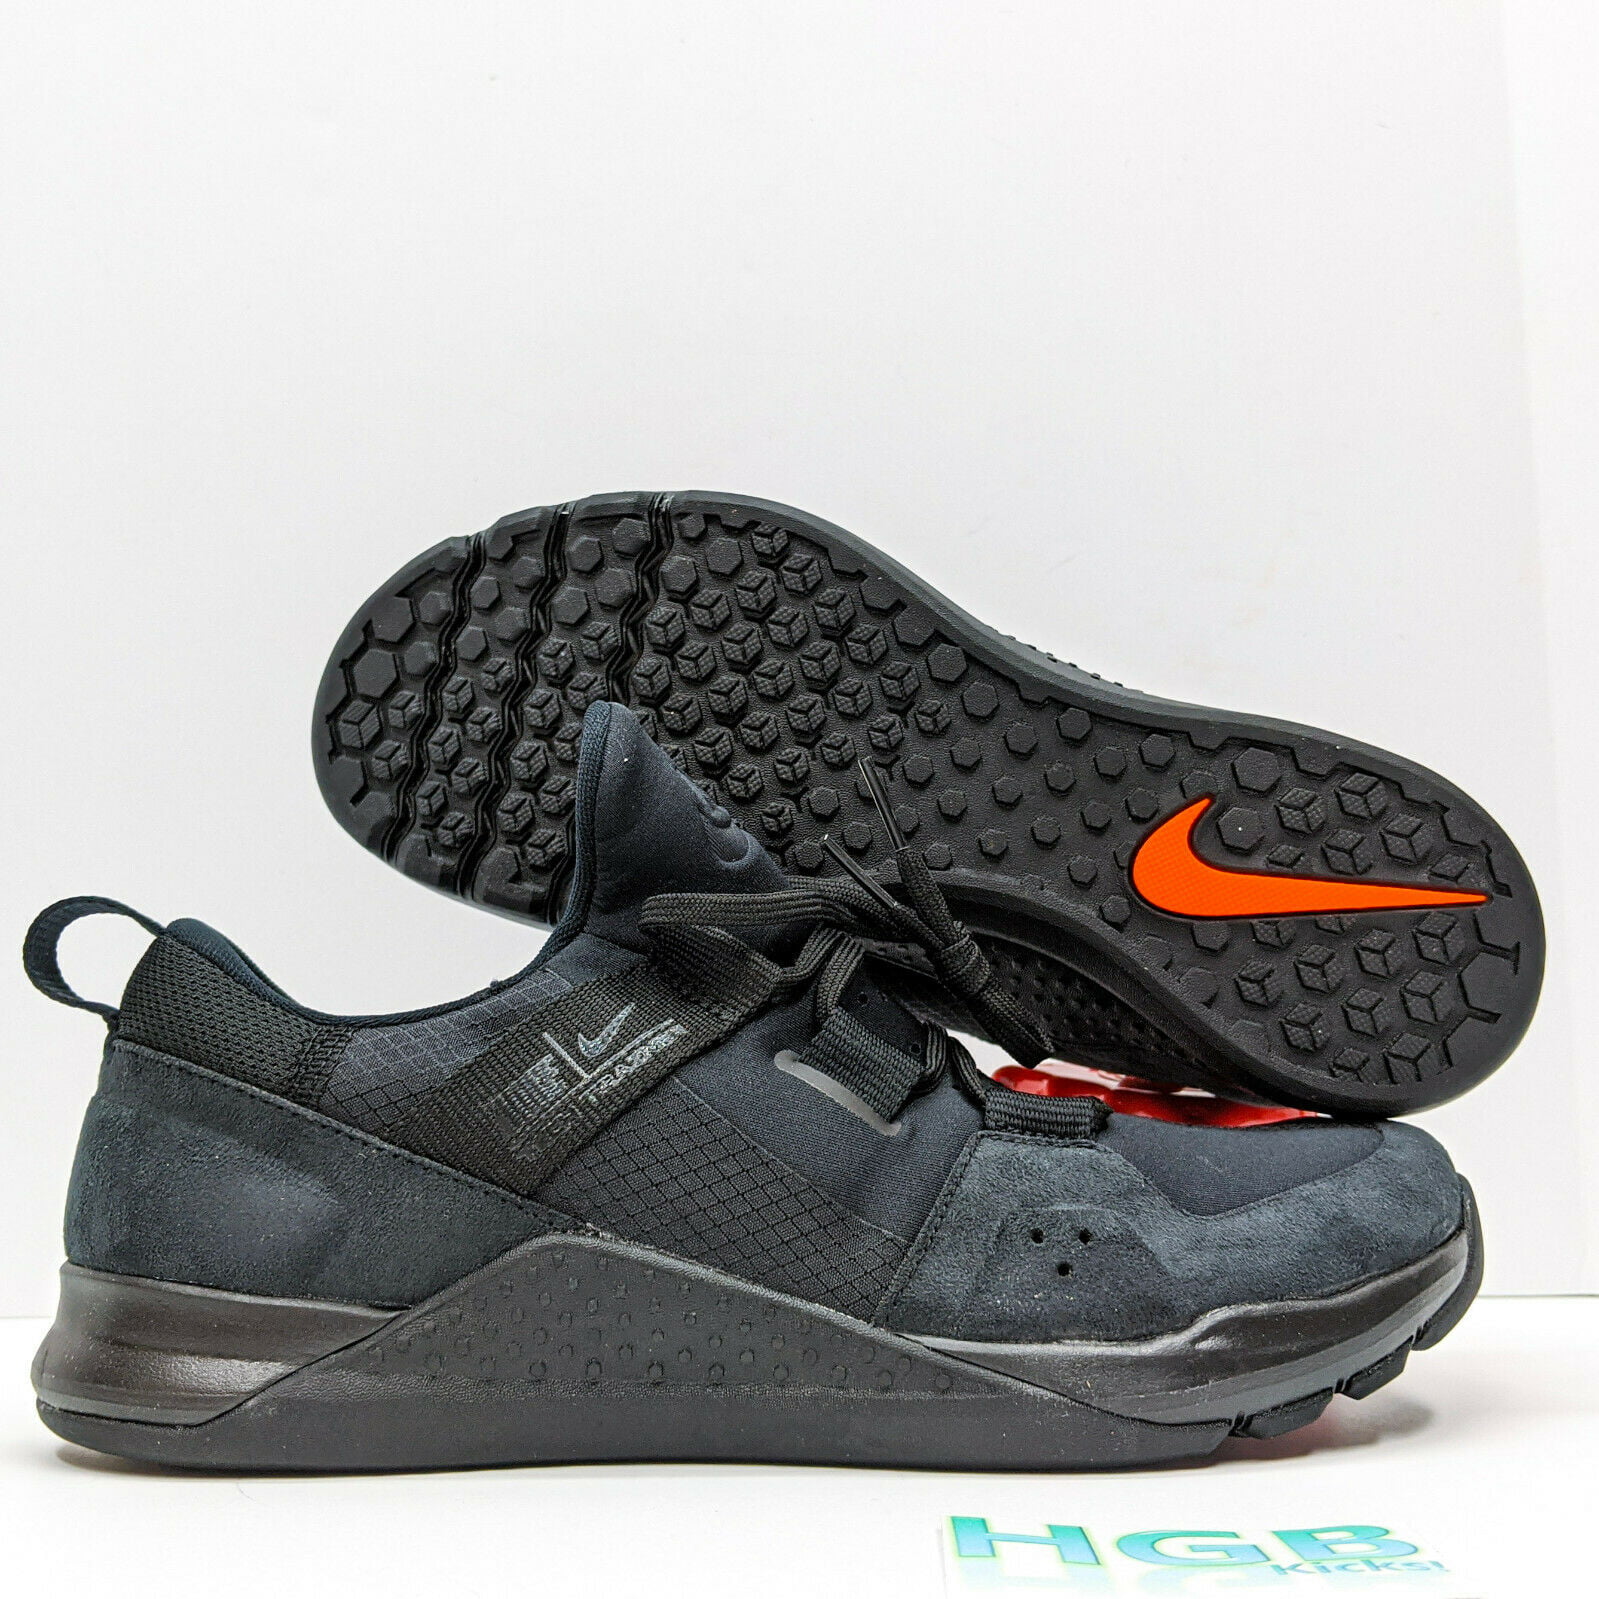 nike tech trainer shoes